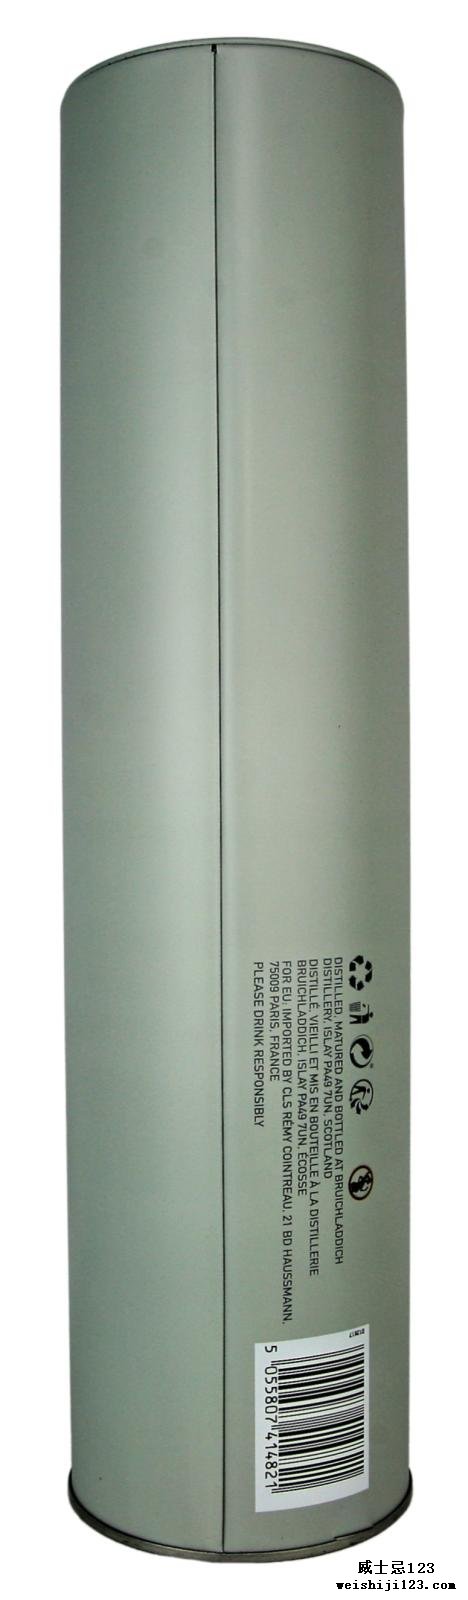 Octomore Edition 12.3 The Impossible Equation / 118.1 PPM